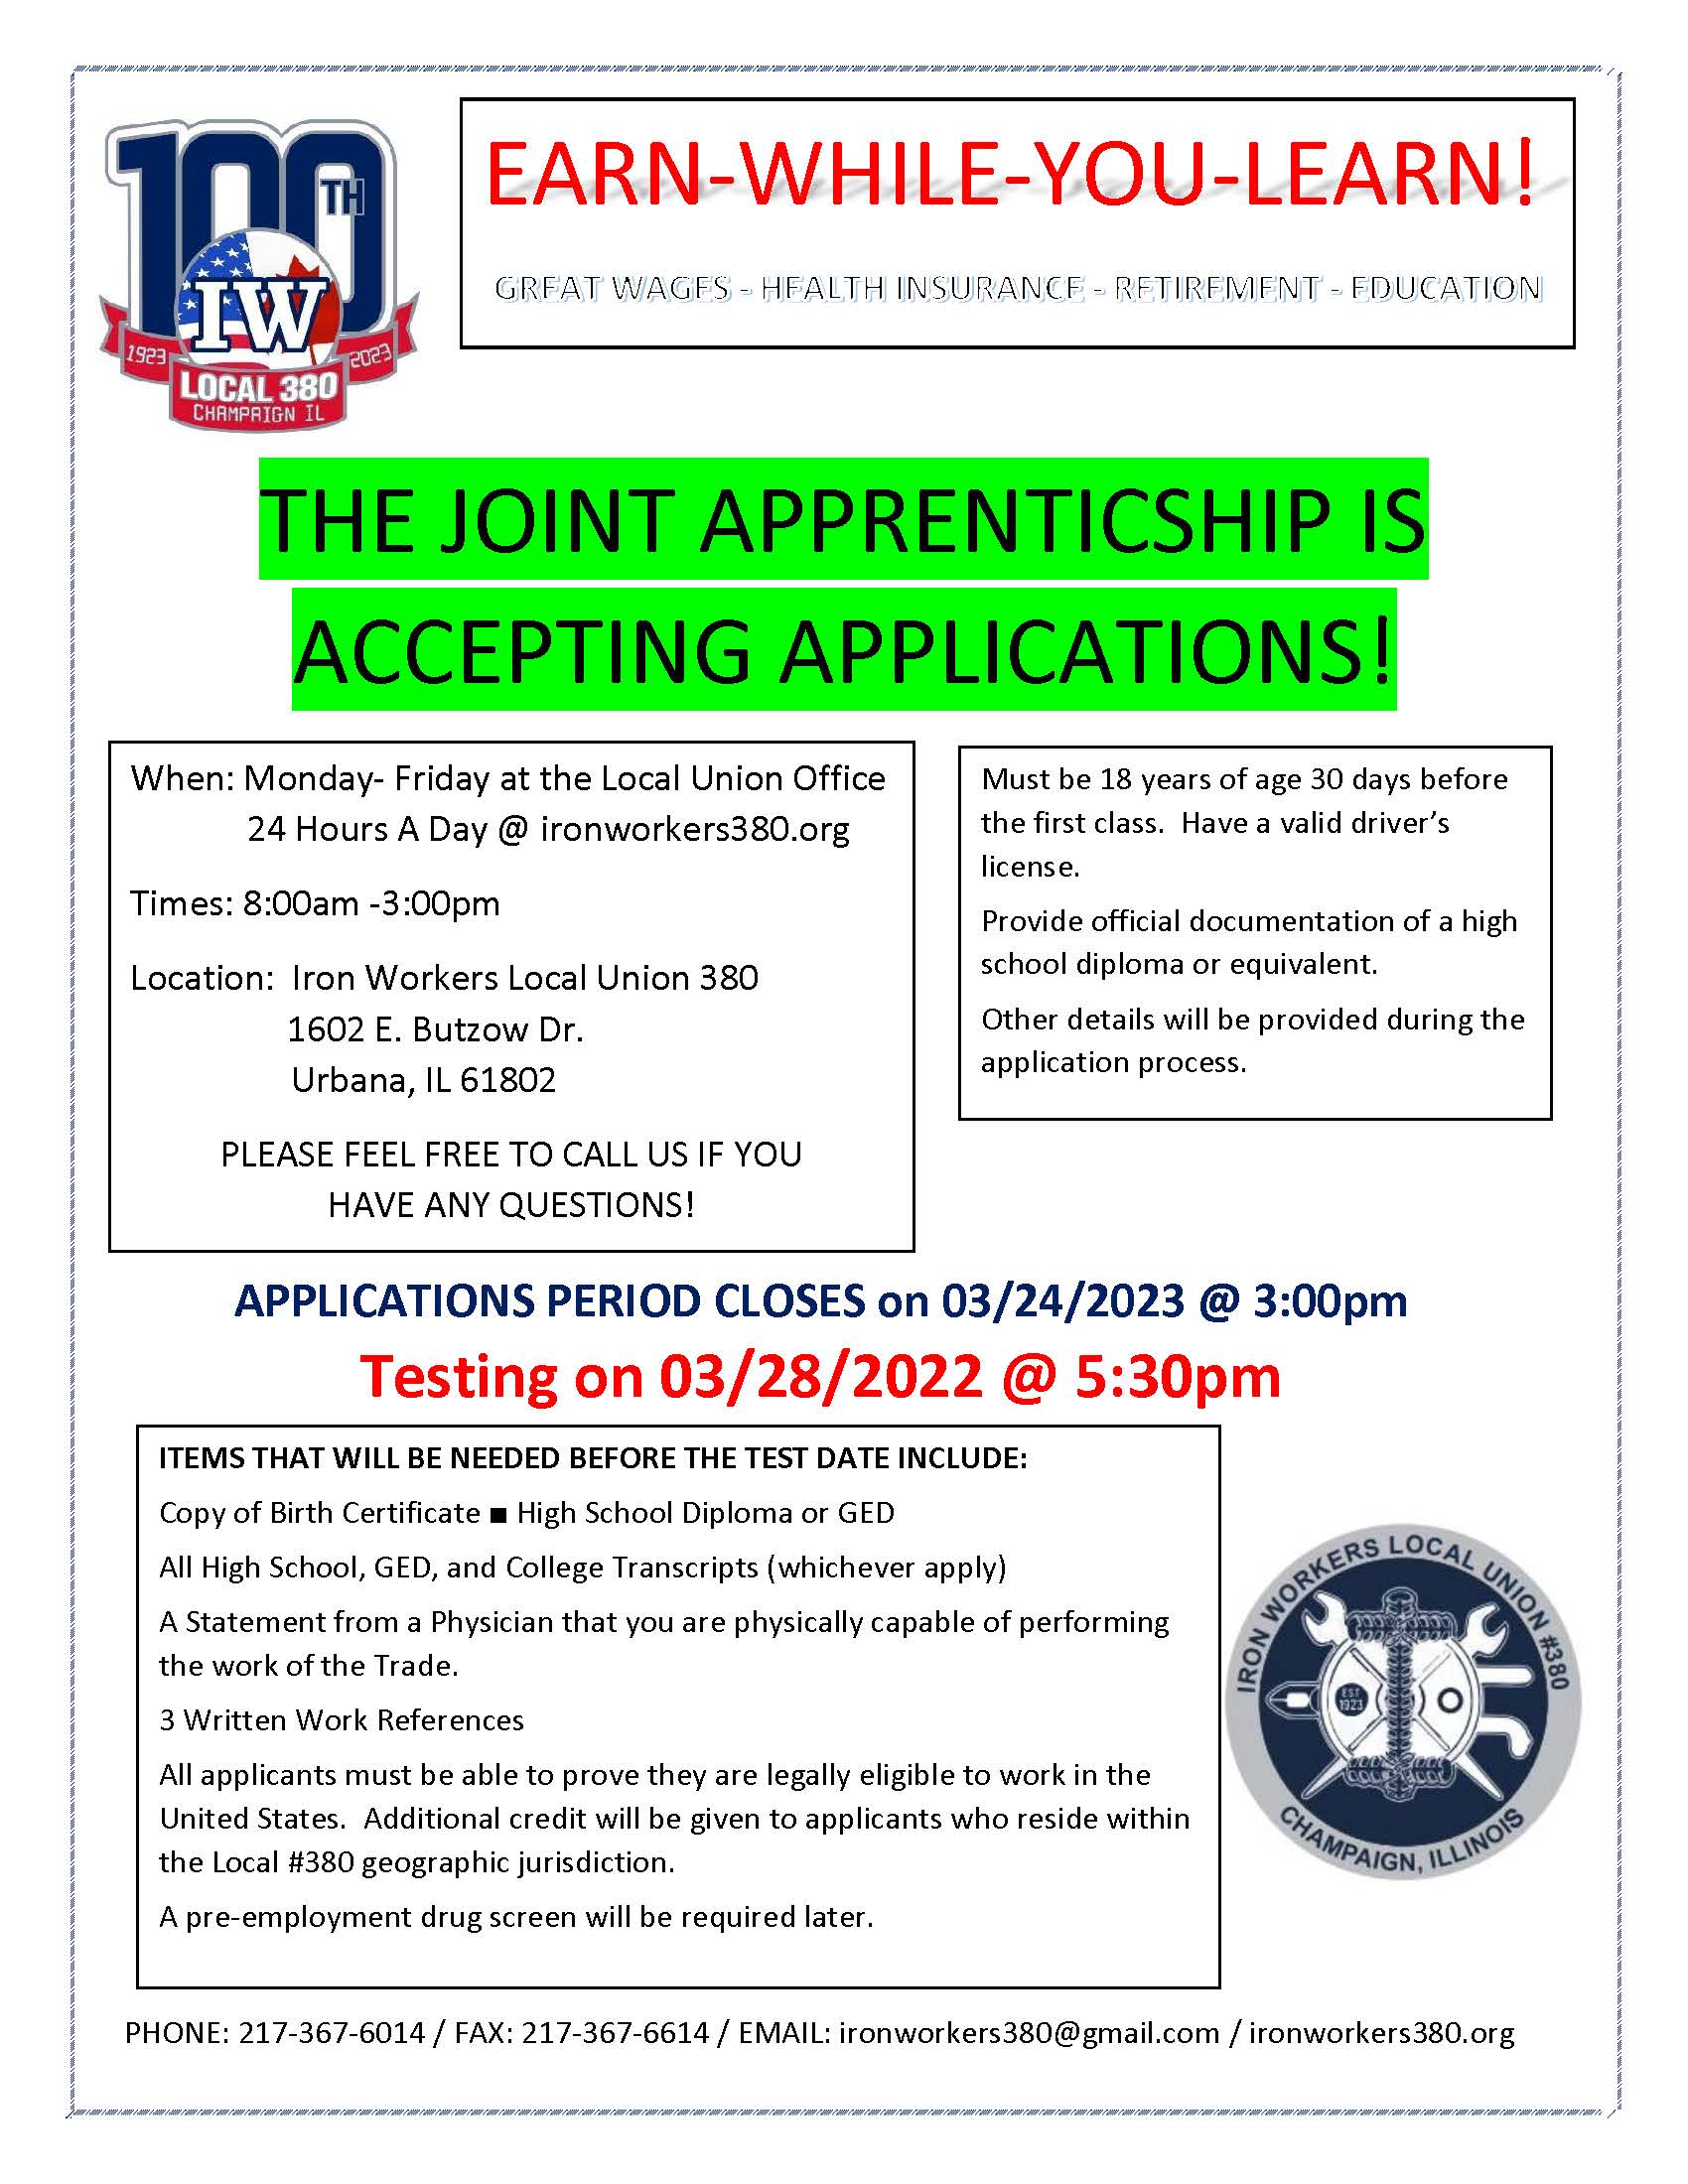 THE JOINT APPRENTICSHIP IS ACCEPTING APPLICATIONS